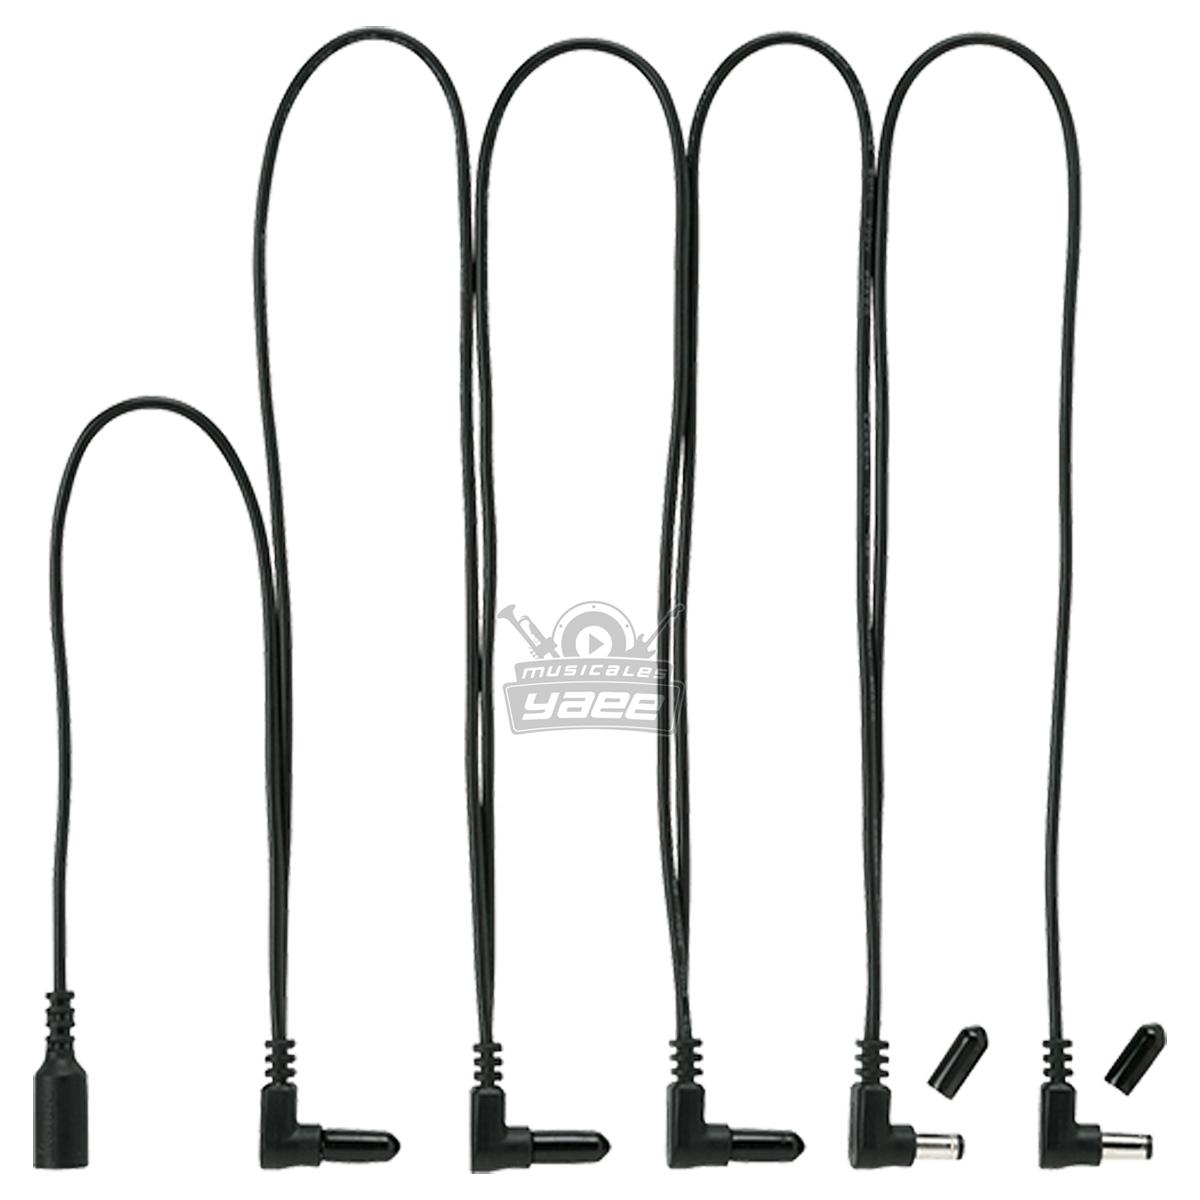 DAISY CHAIN IBANEZ CABLE PARA 5 PEDALES DC501L